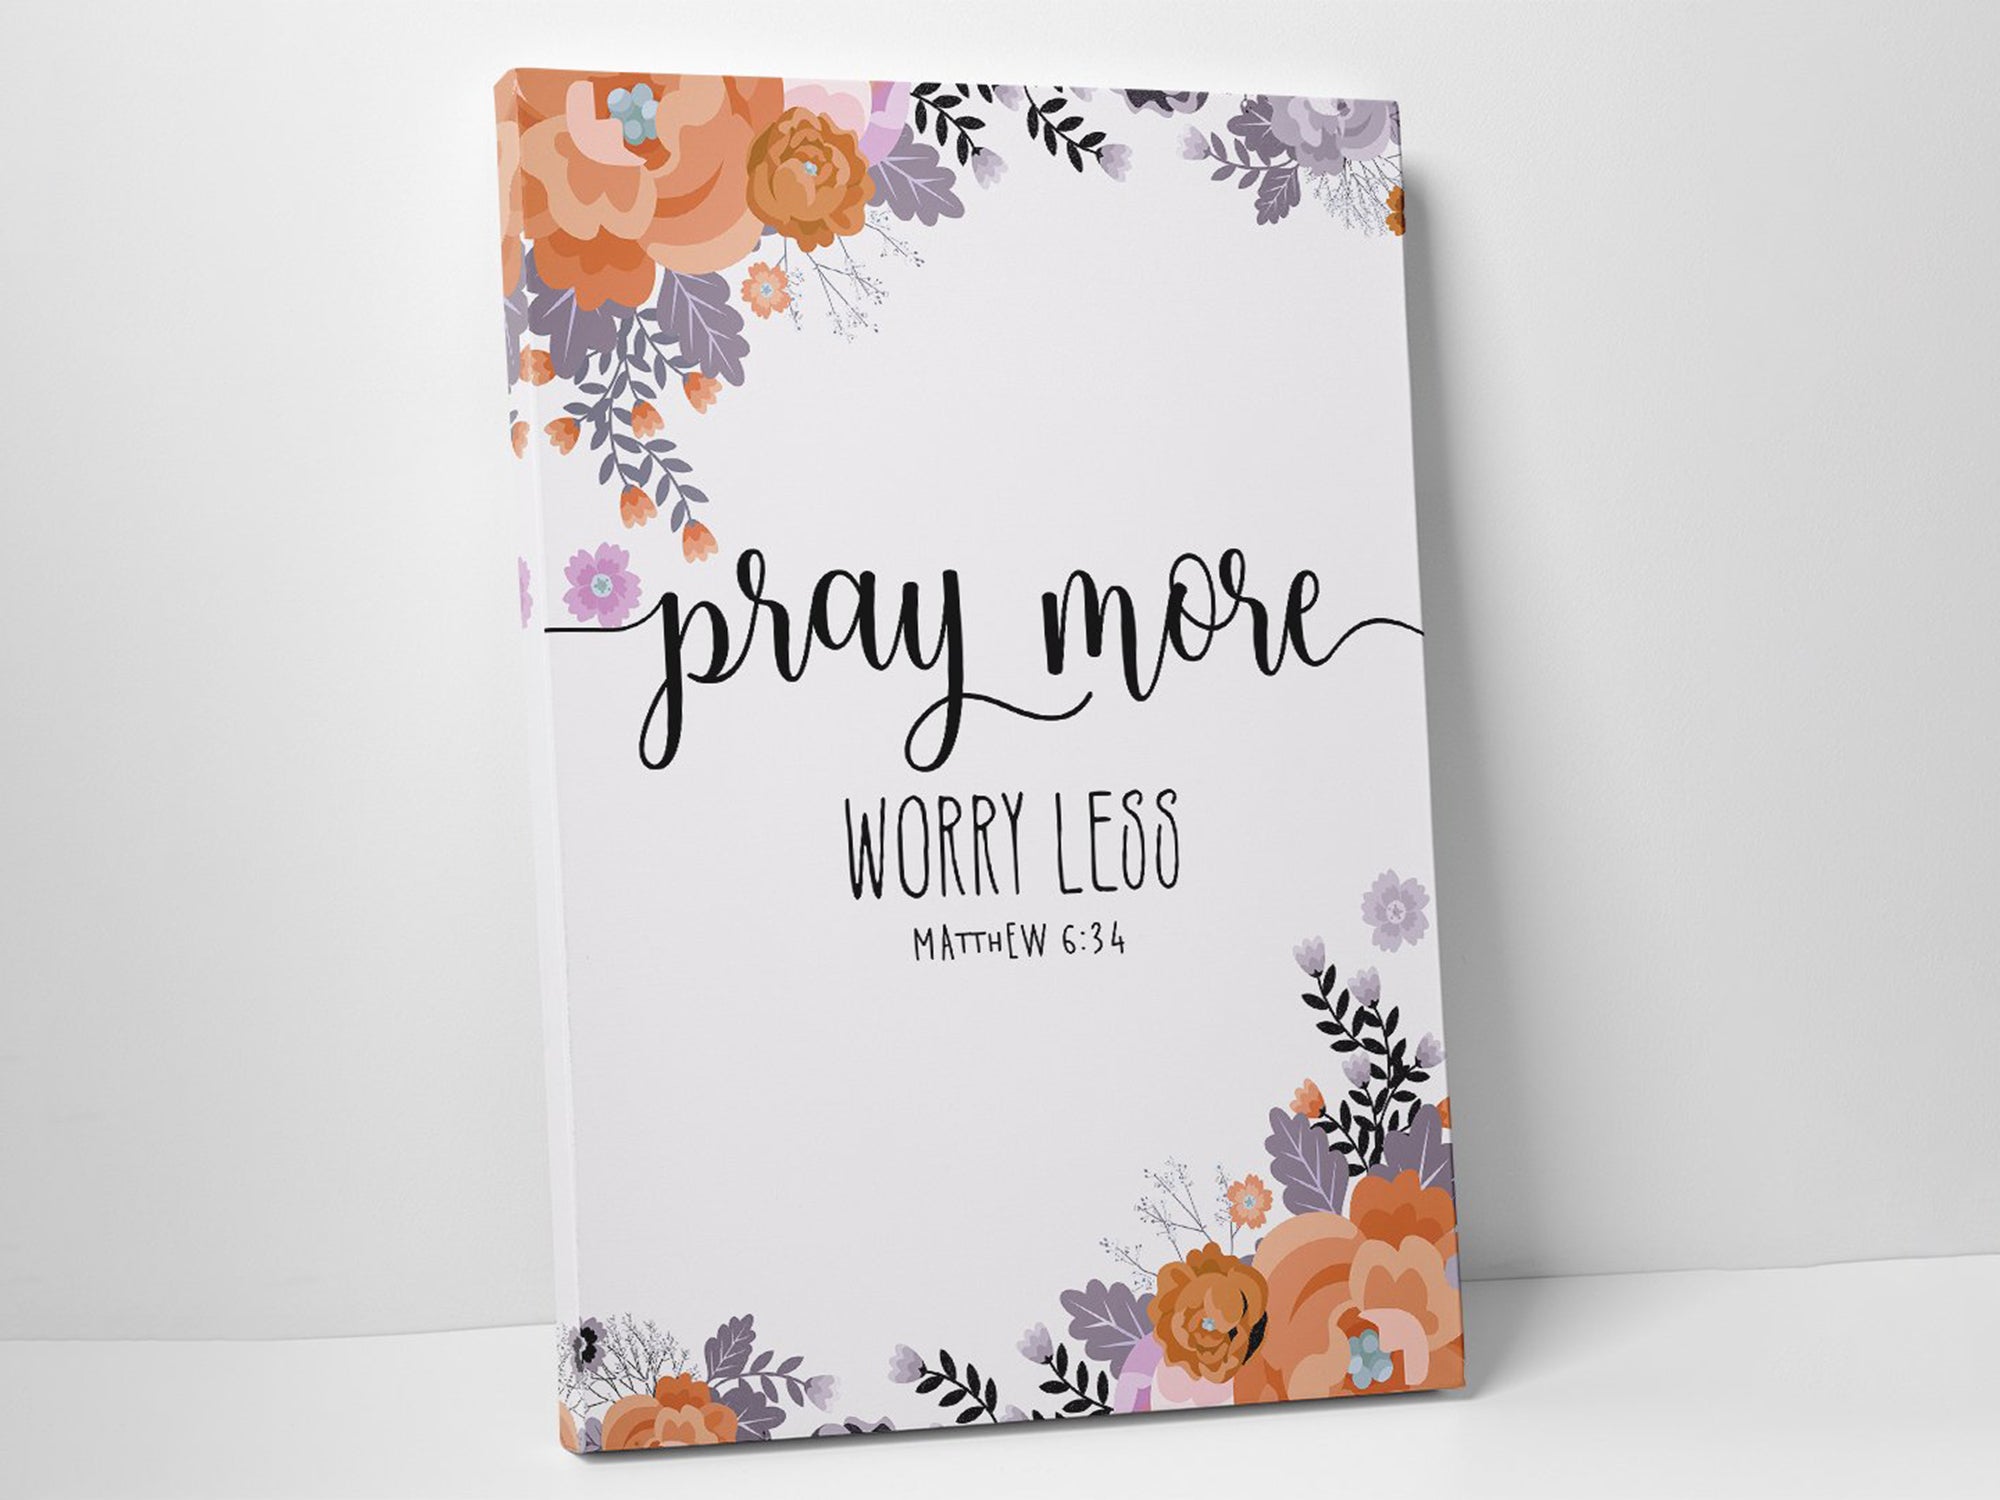 Pray More Worry Less - Christian - Canvas Wall Art